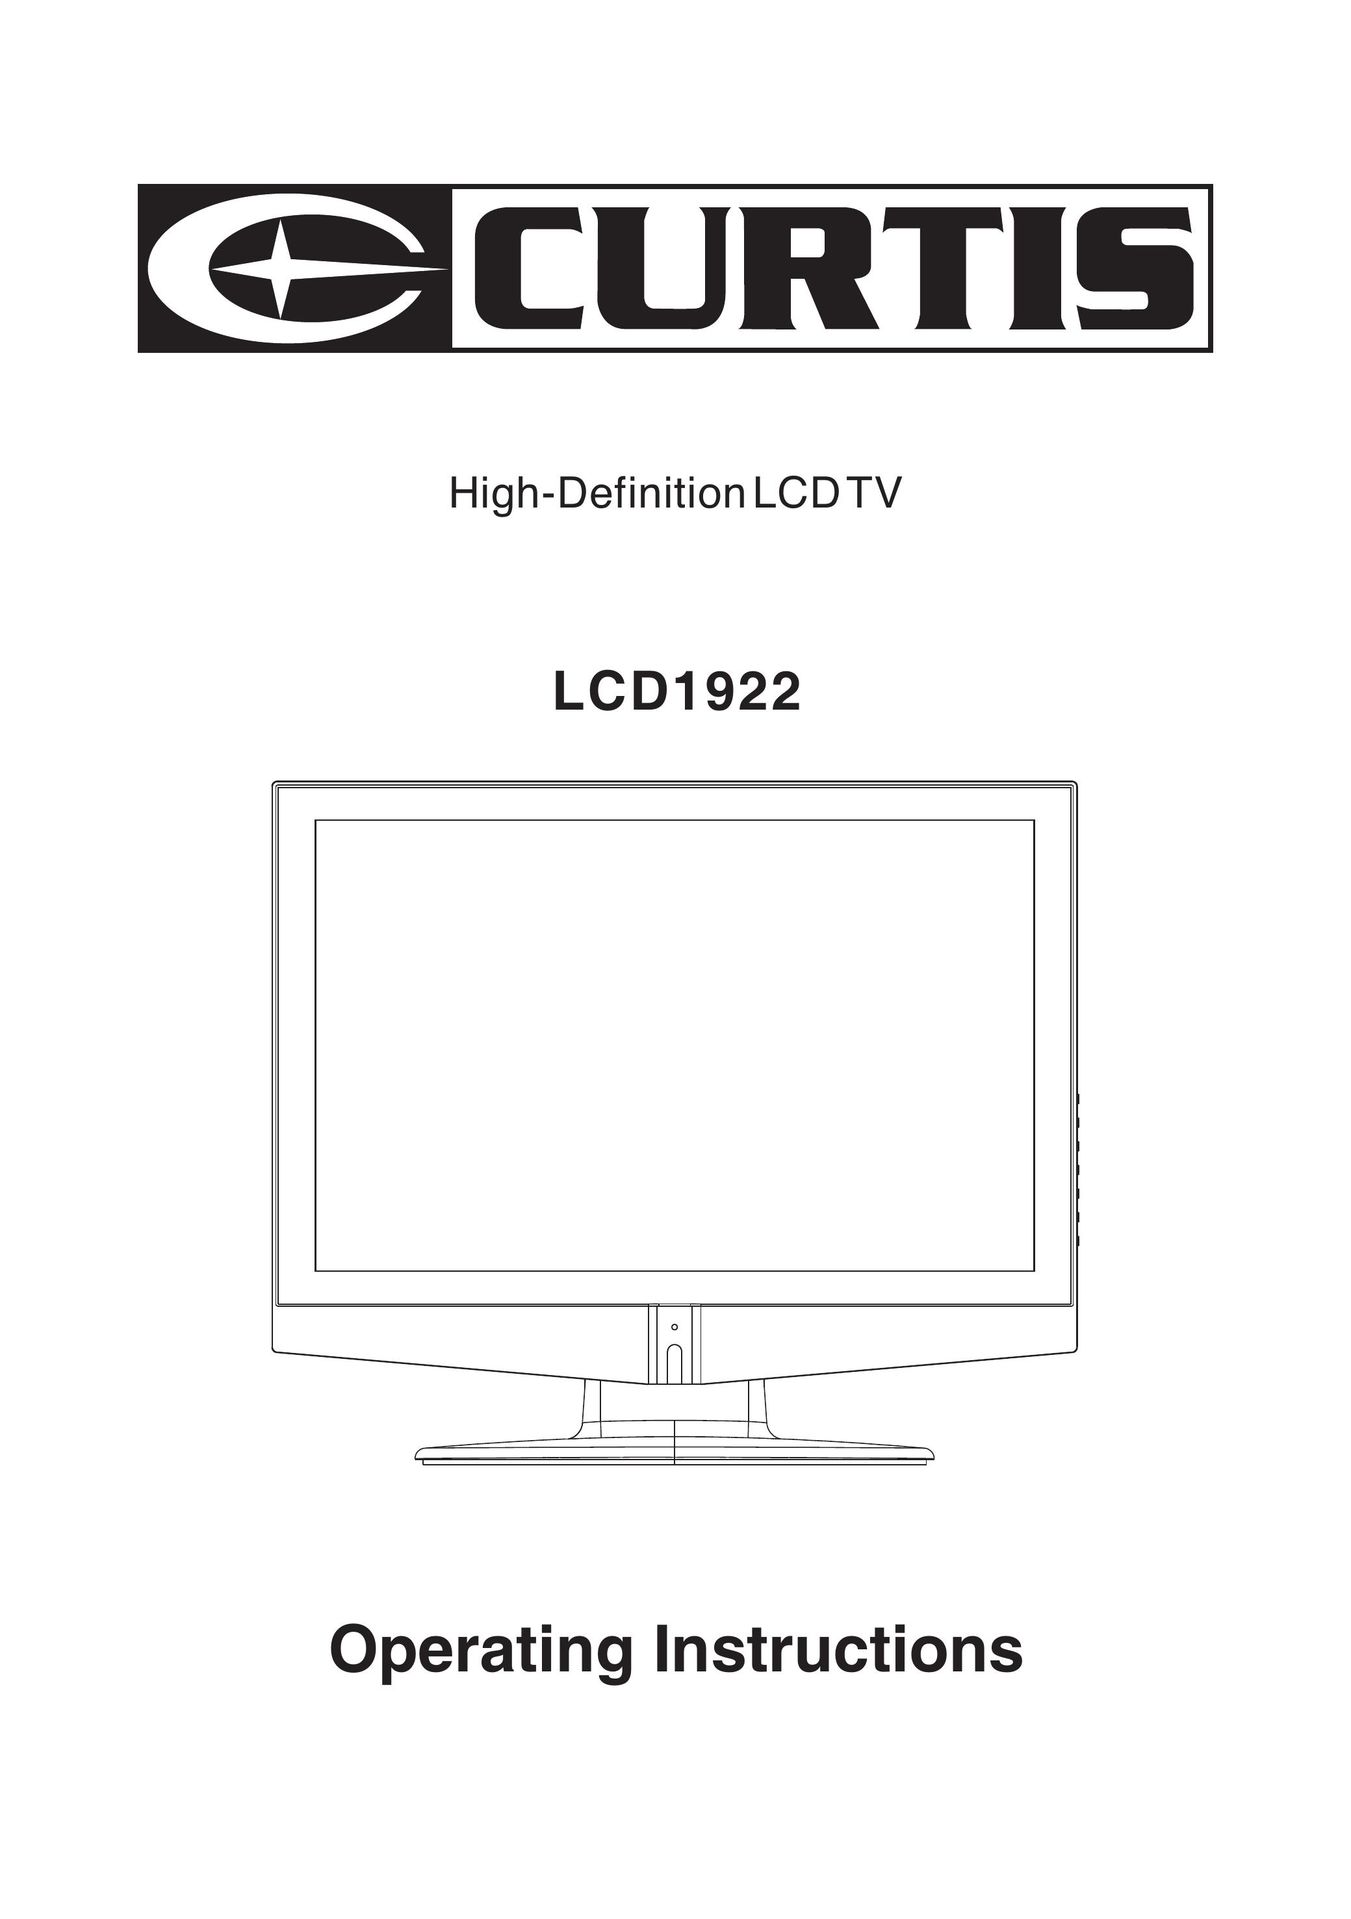 Curtis LCD1922 Flat Panel Television User Manual